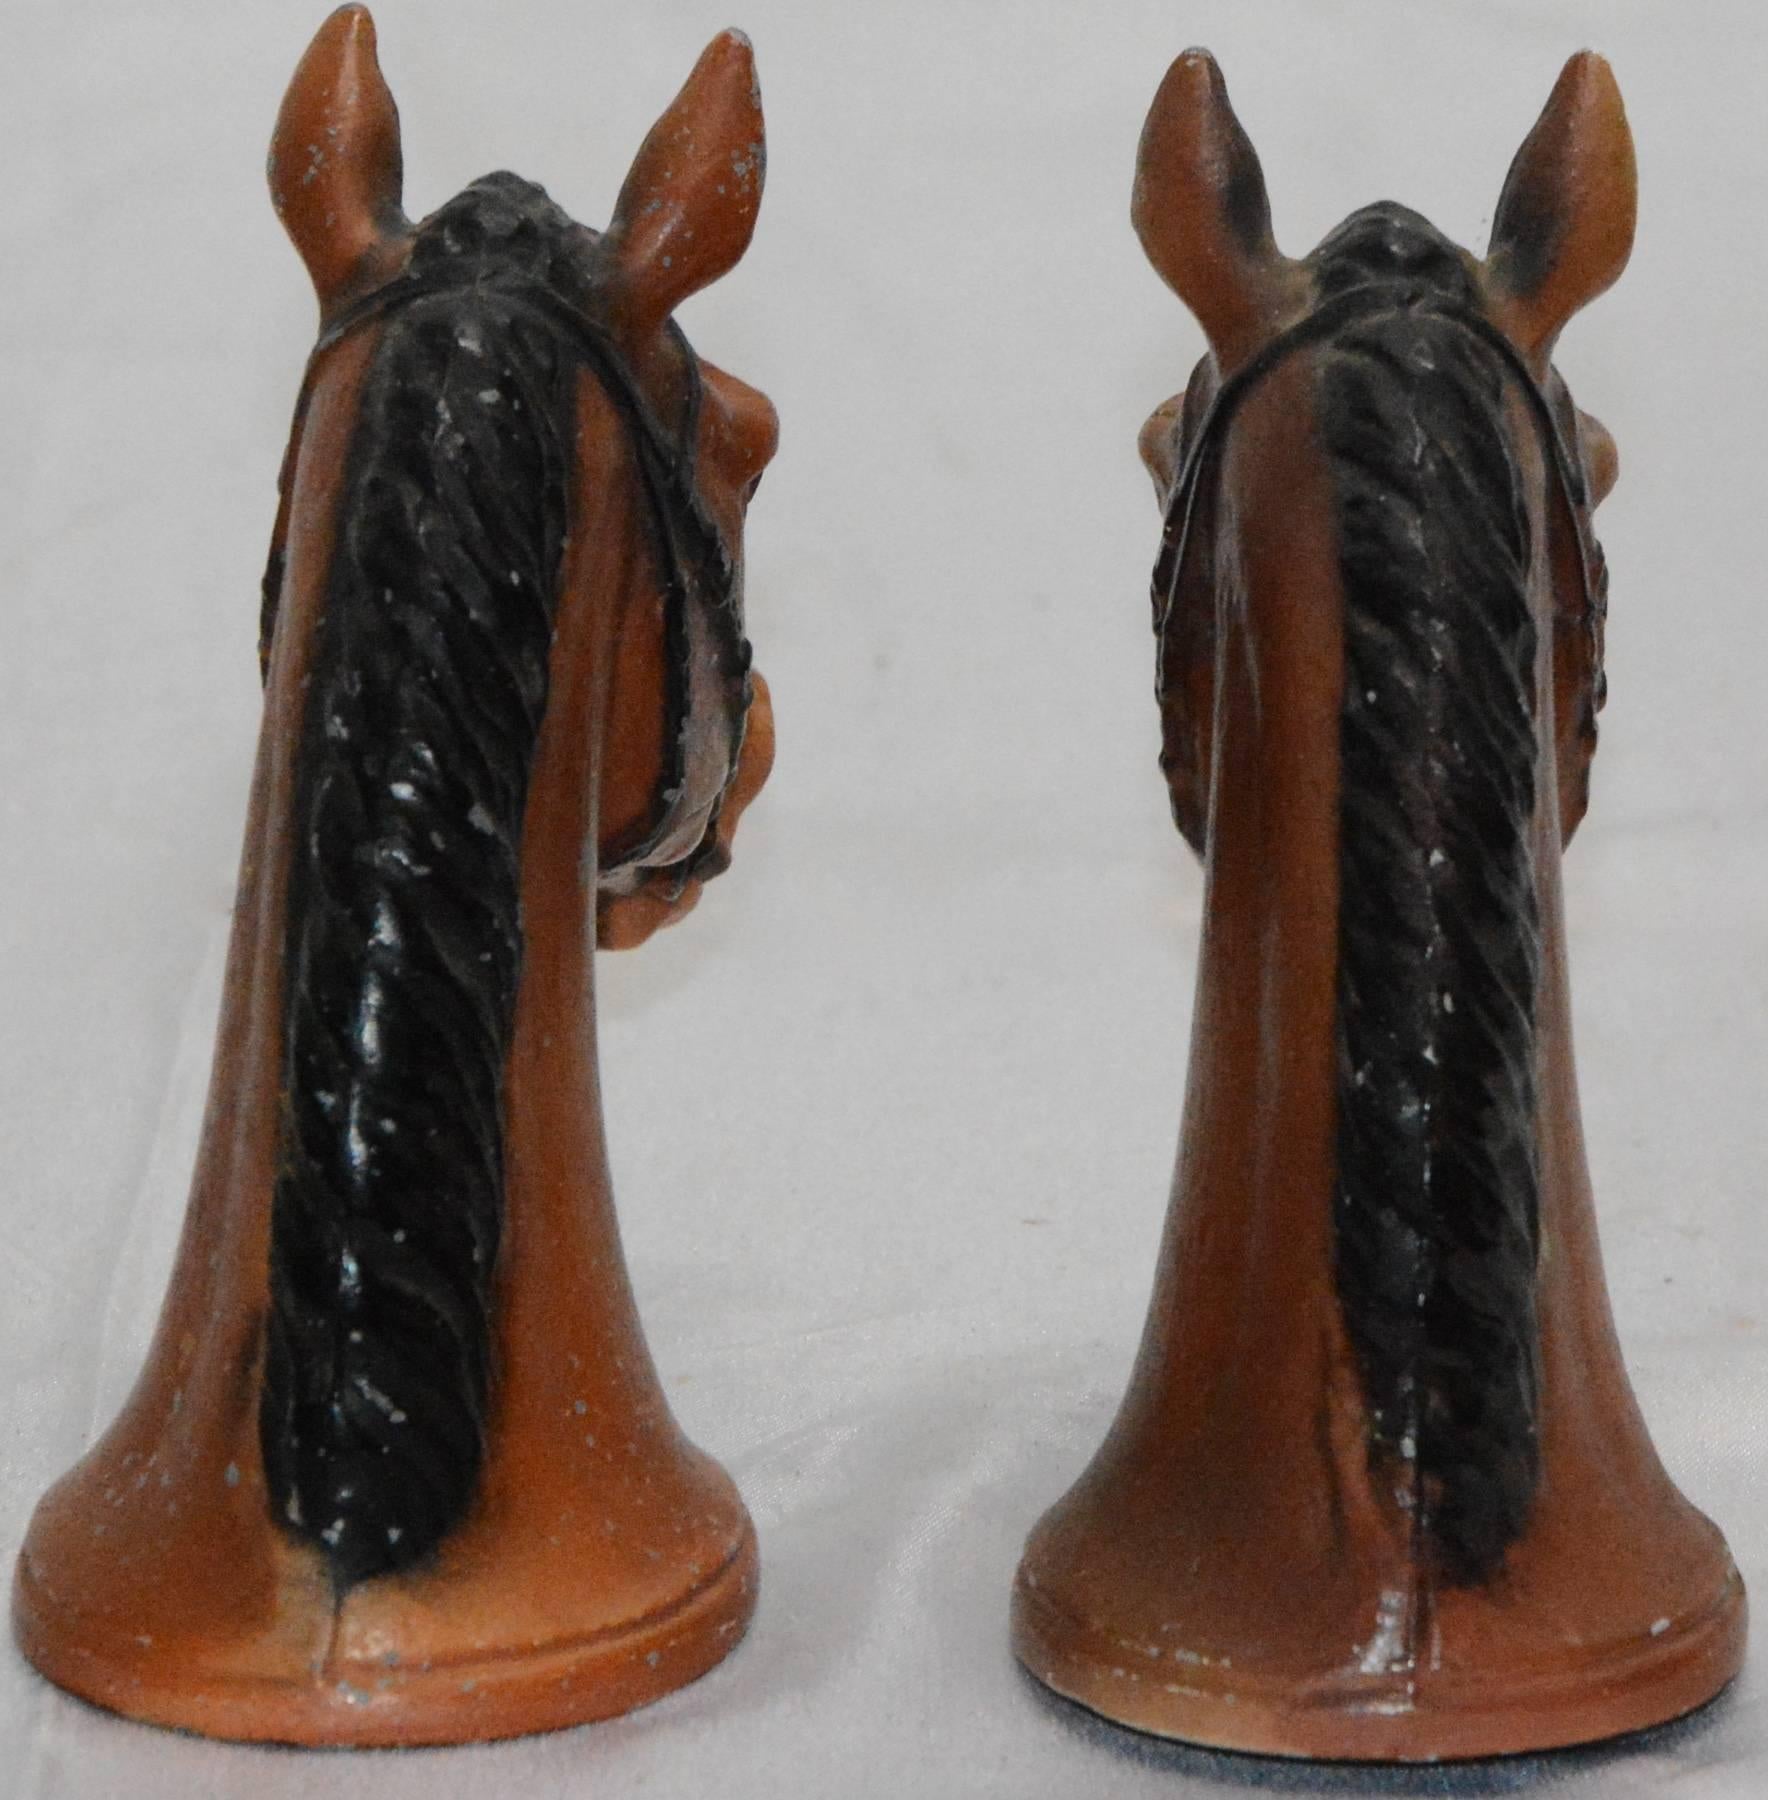 A pair of horses will help you to open your bottles and also look great for you to admire them amongst your collectibles. They were made by the Rubal Company of New York in the 1960s. Each horse has its own unique personality!